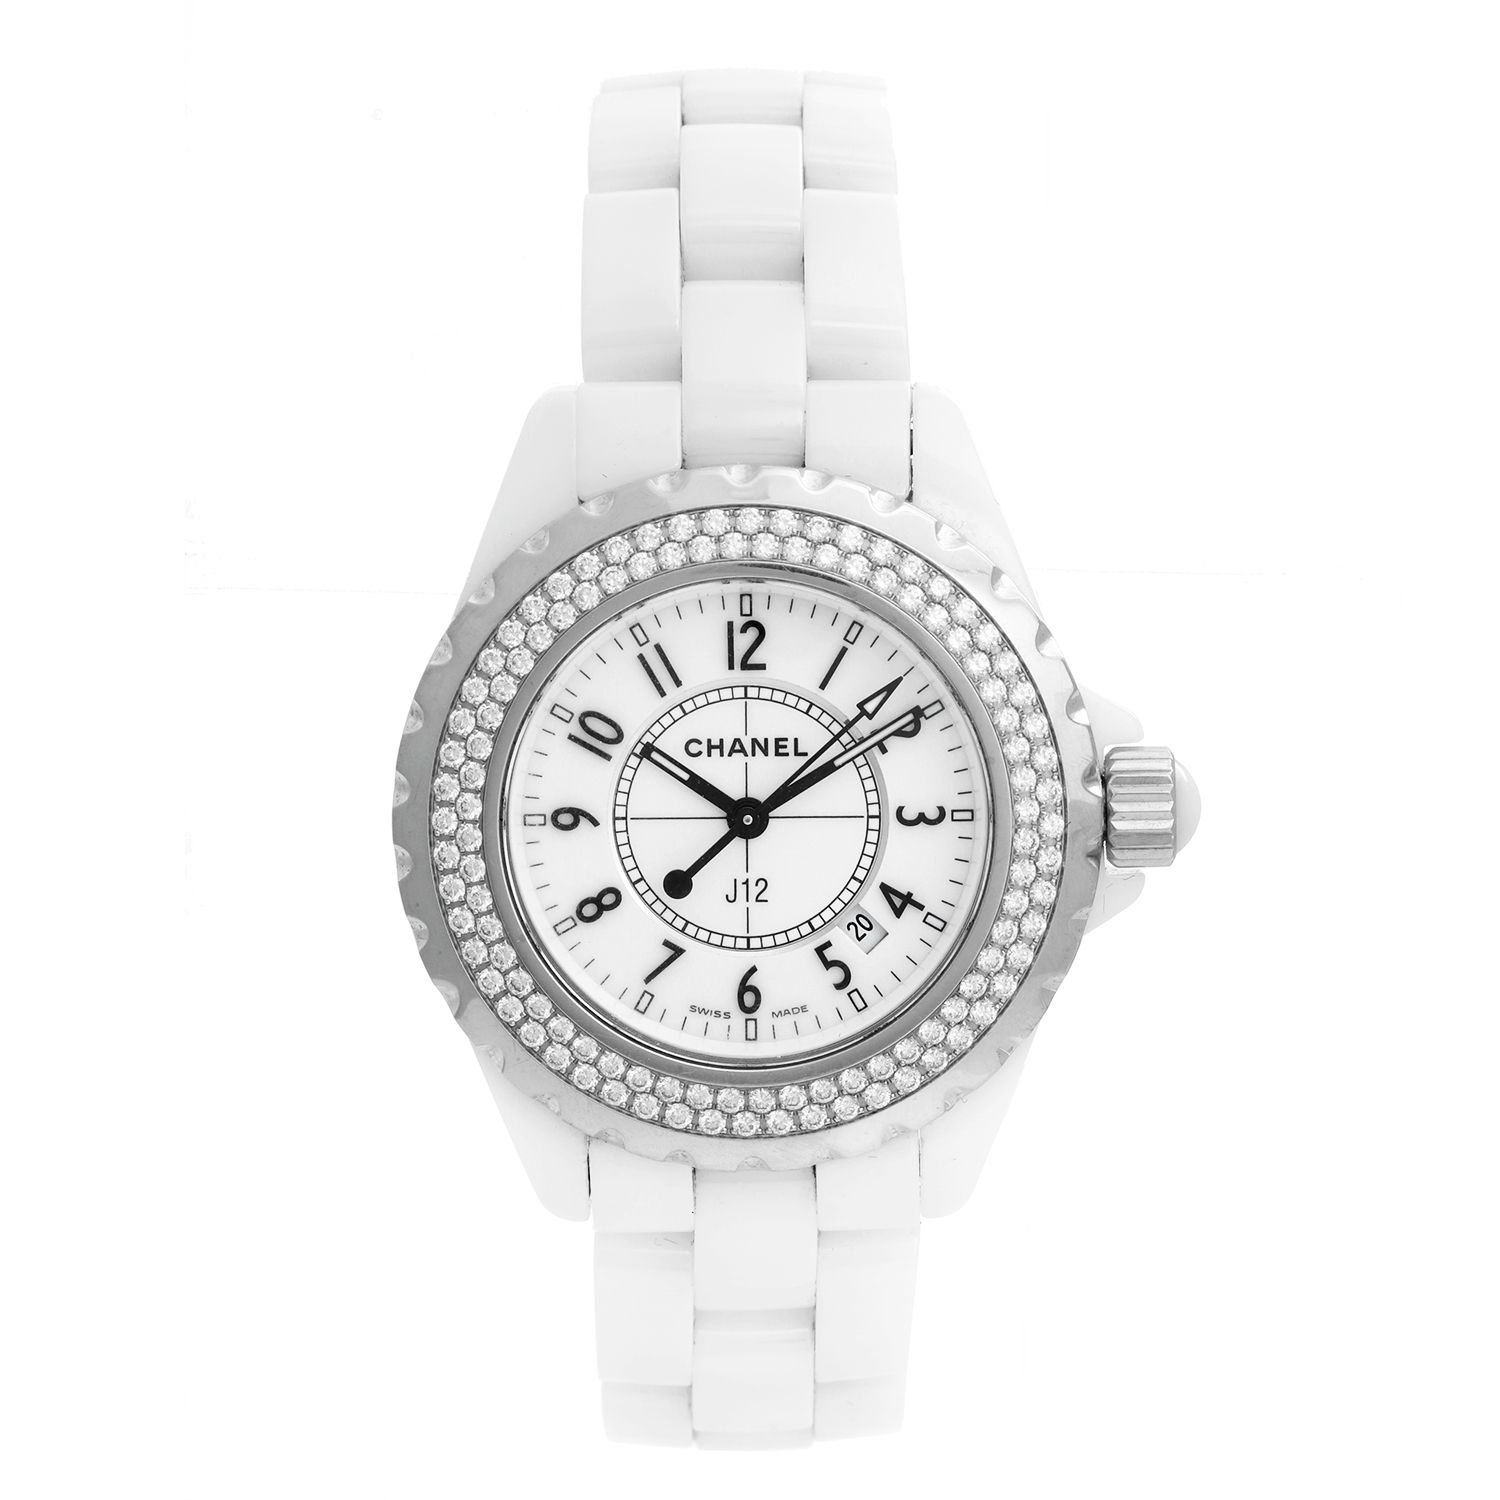 H2013 J12 Chanel Ceramic White Diamond Dial and Bezel Womens Automatic Watch 